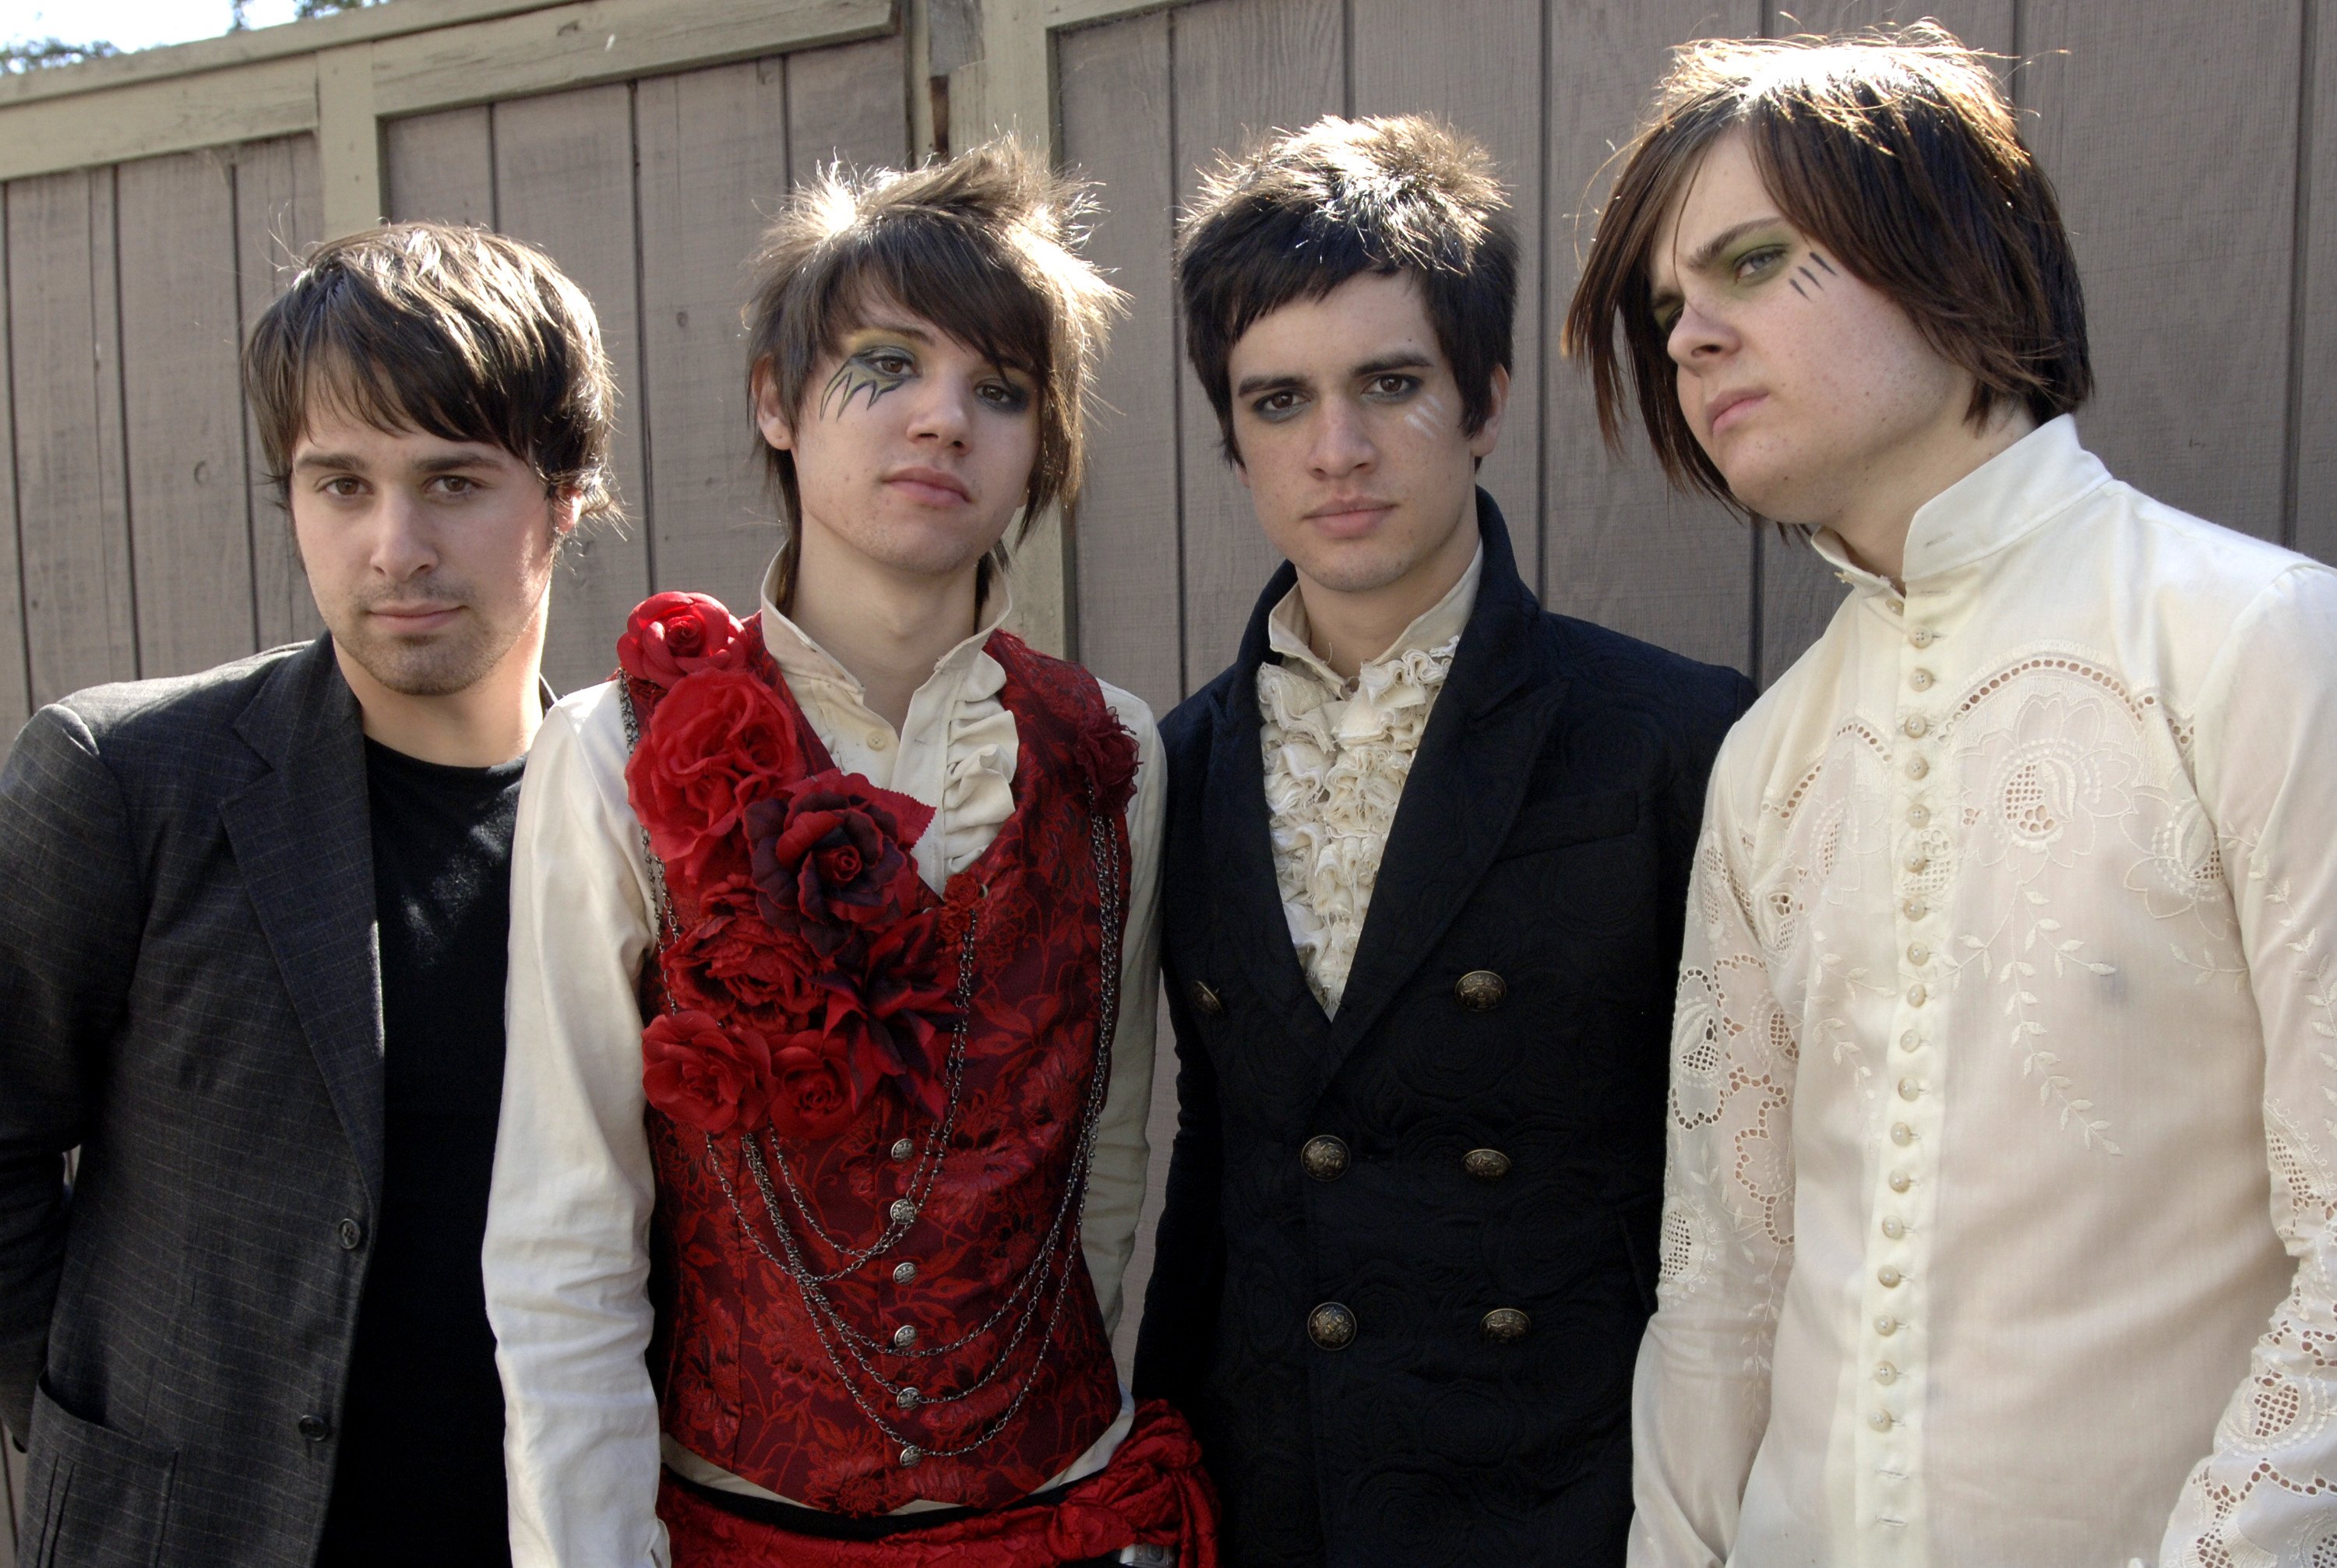 Panic! Attack: Our 2006 Panic! At the Disco Cover